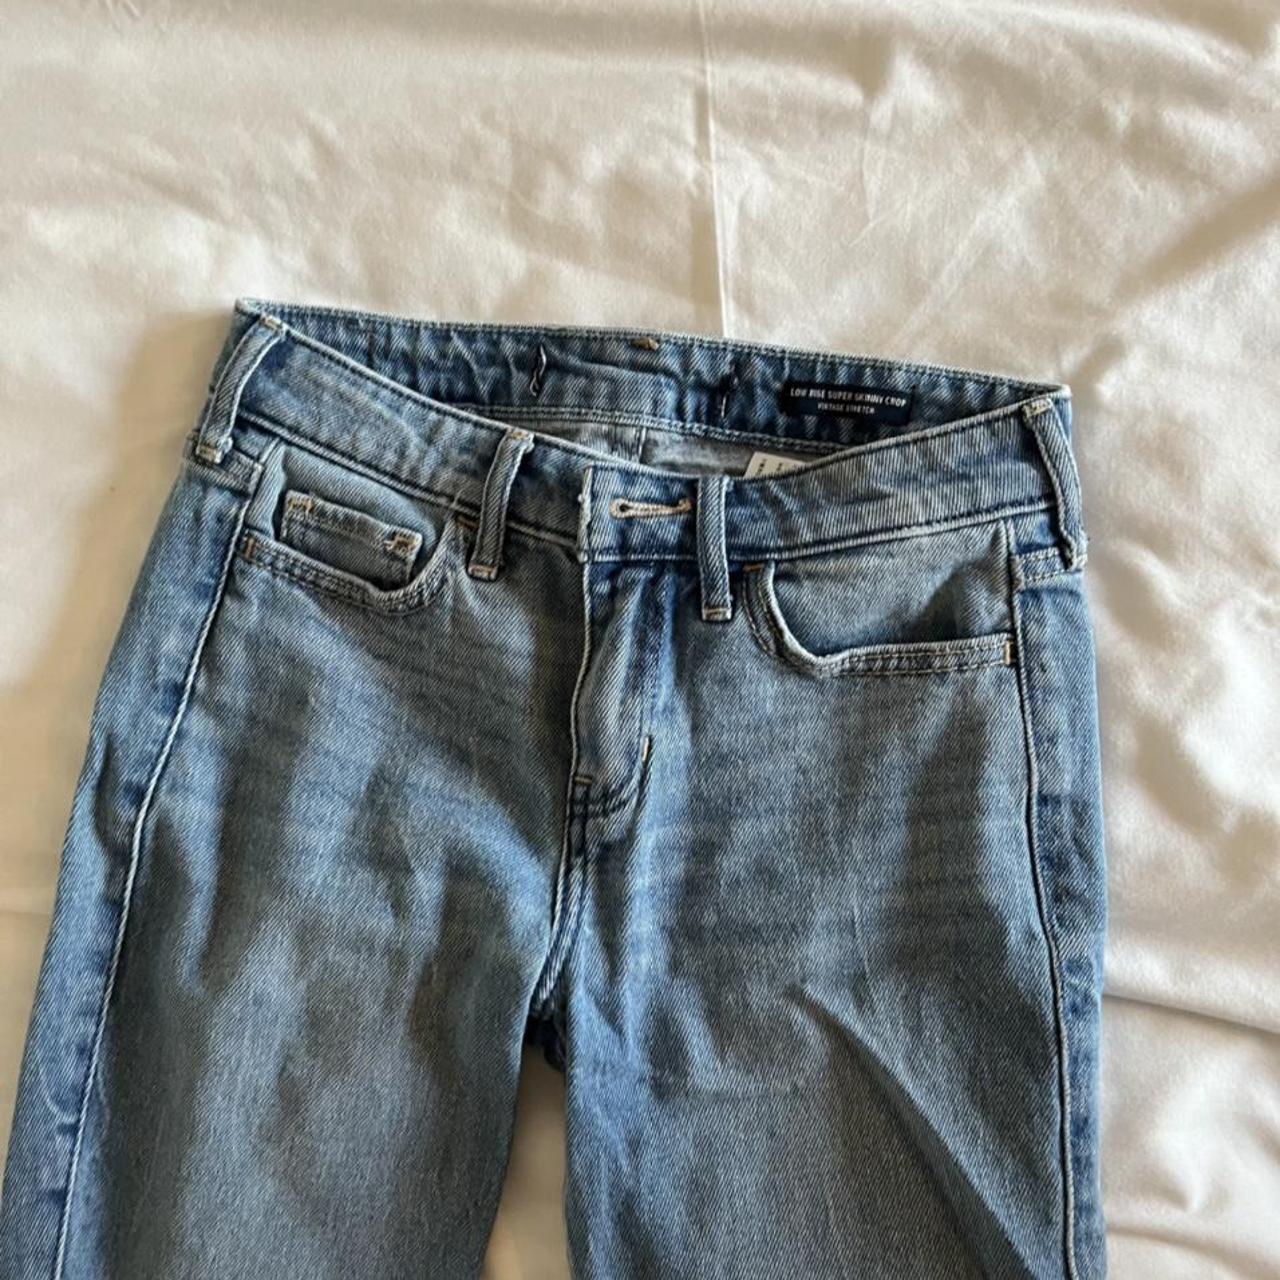 Hollister Co. Women's Navy and Blue Jeans (2)